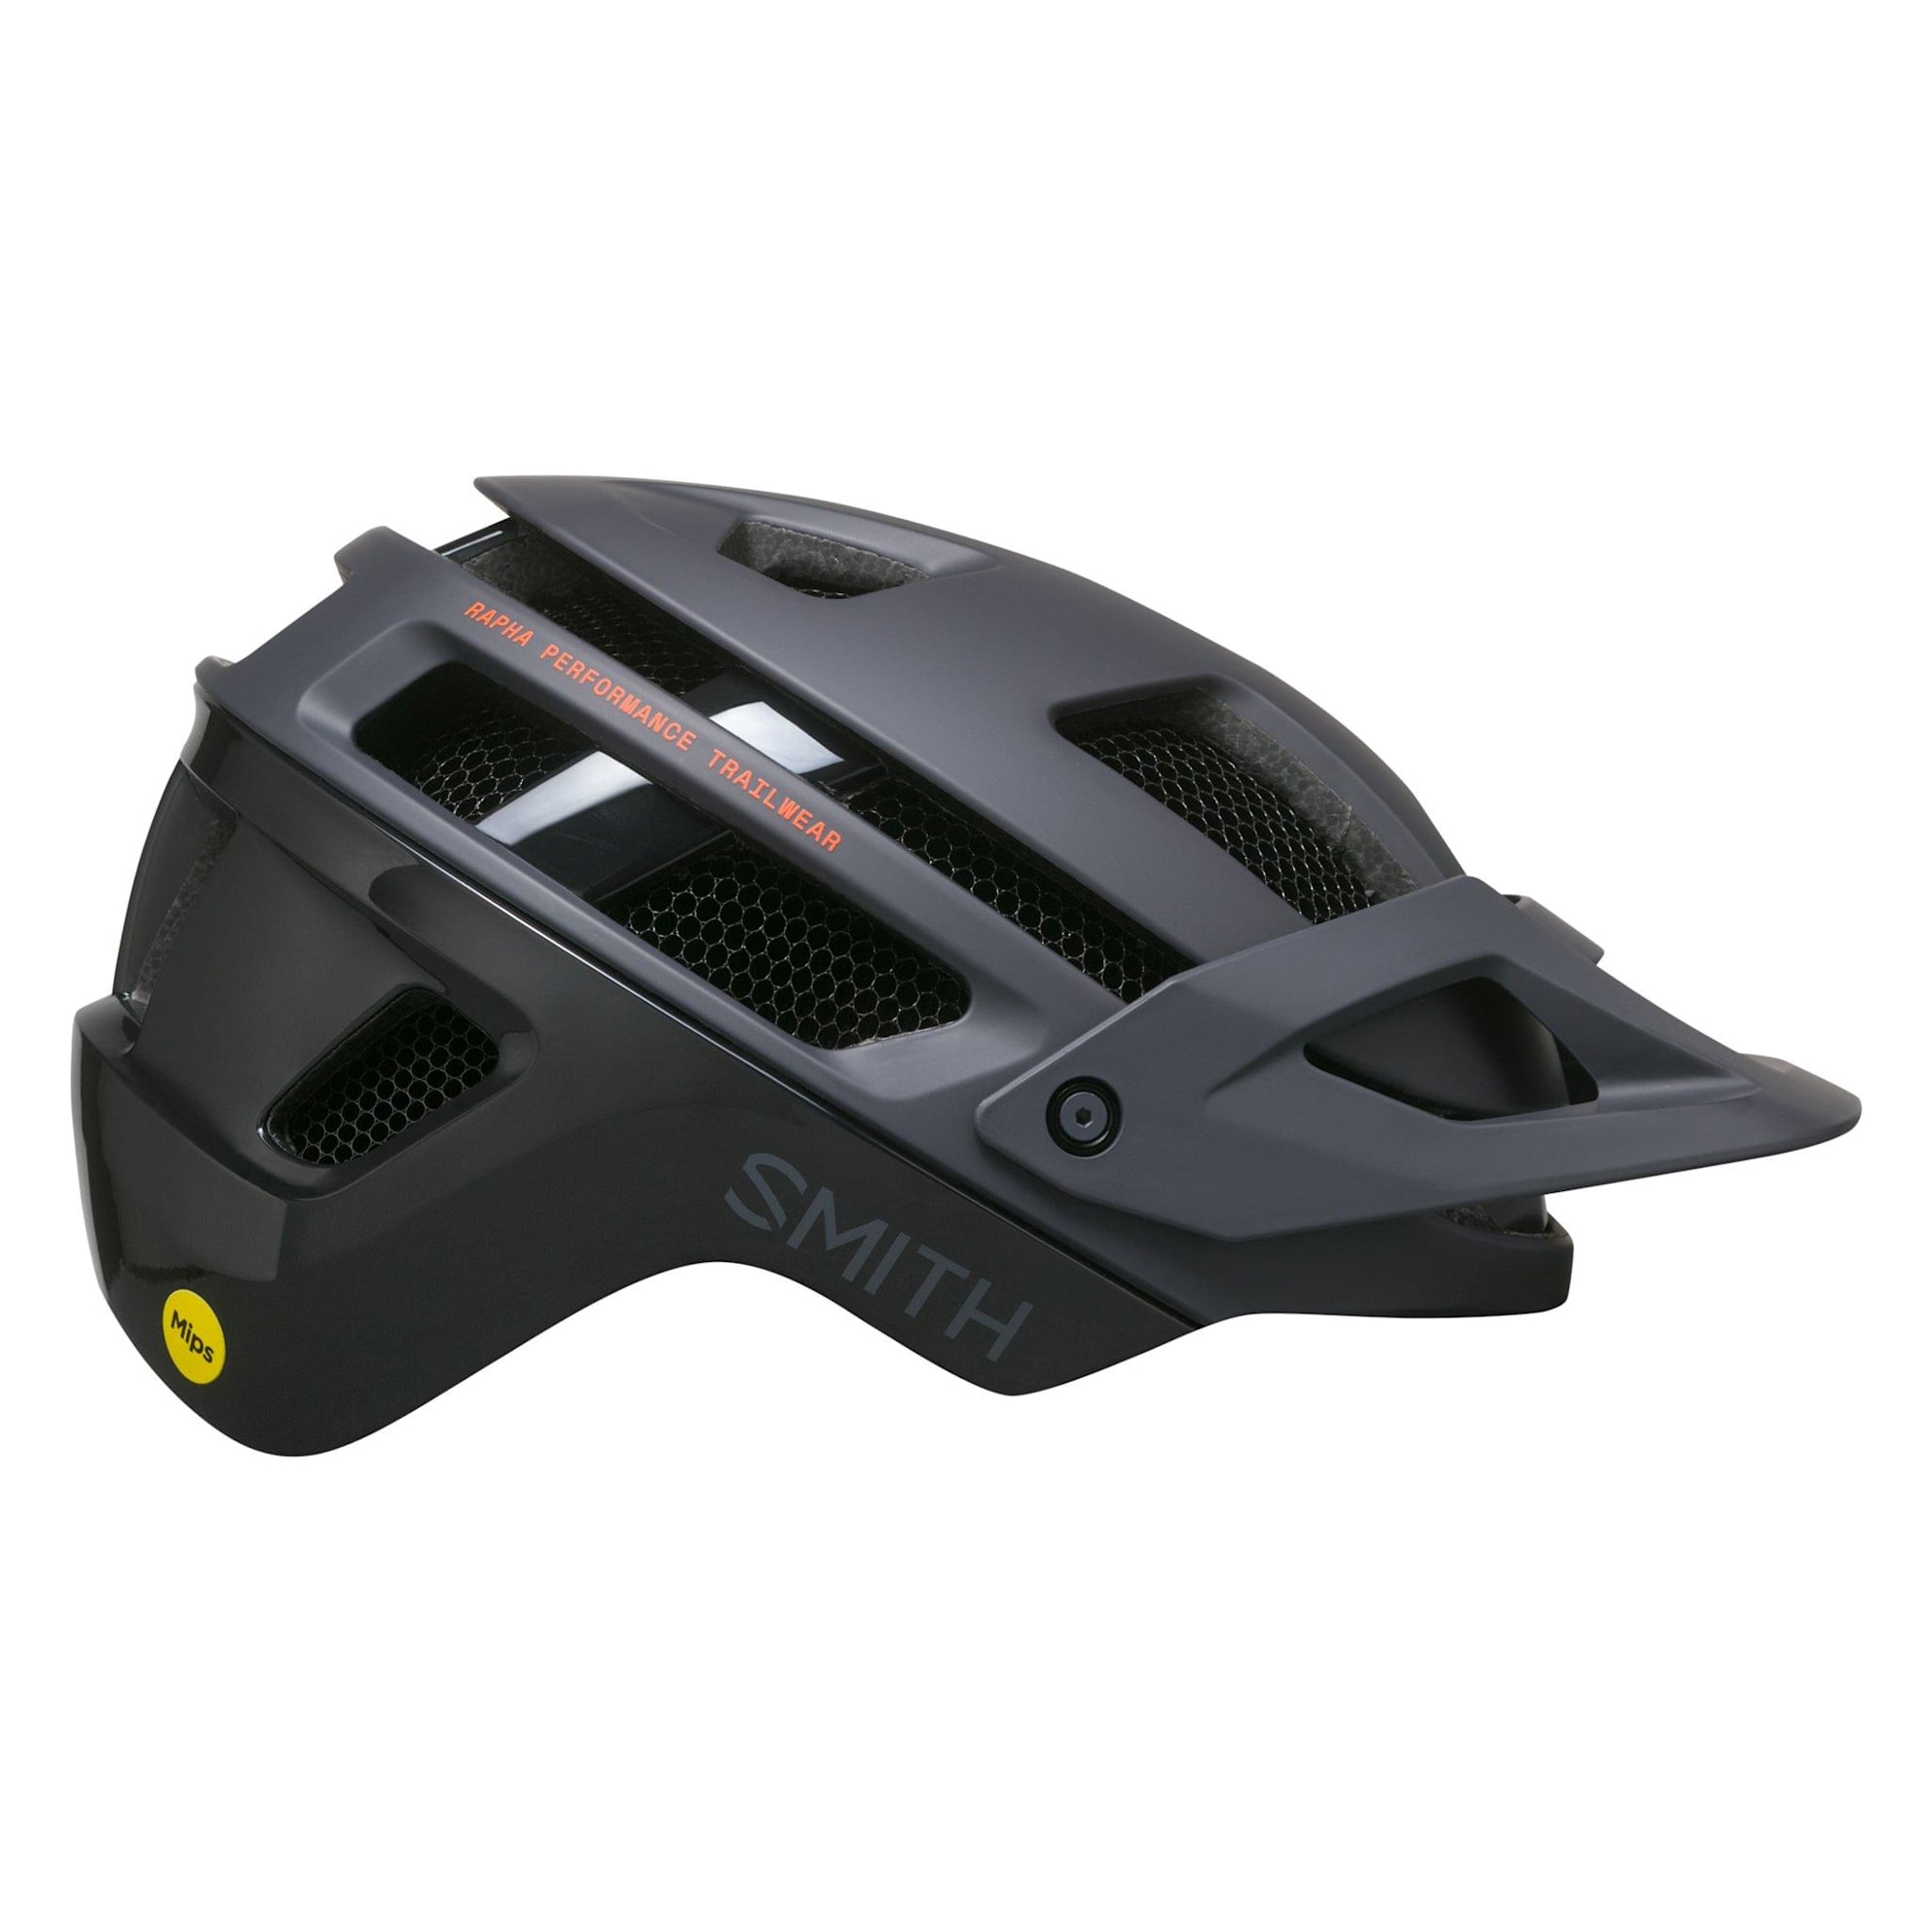 Rapha x Smith Forefront 2 Trail Helmet - US